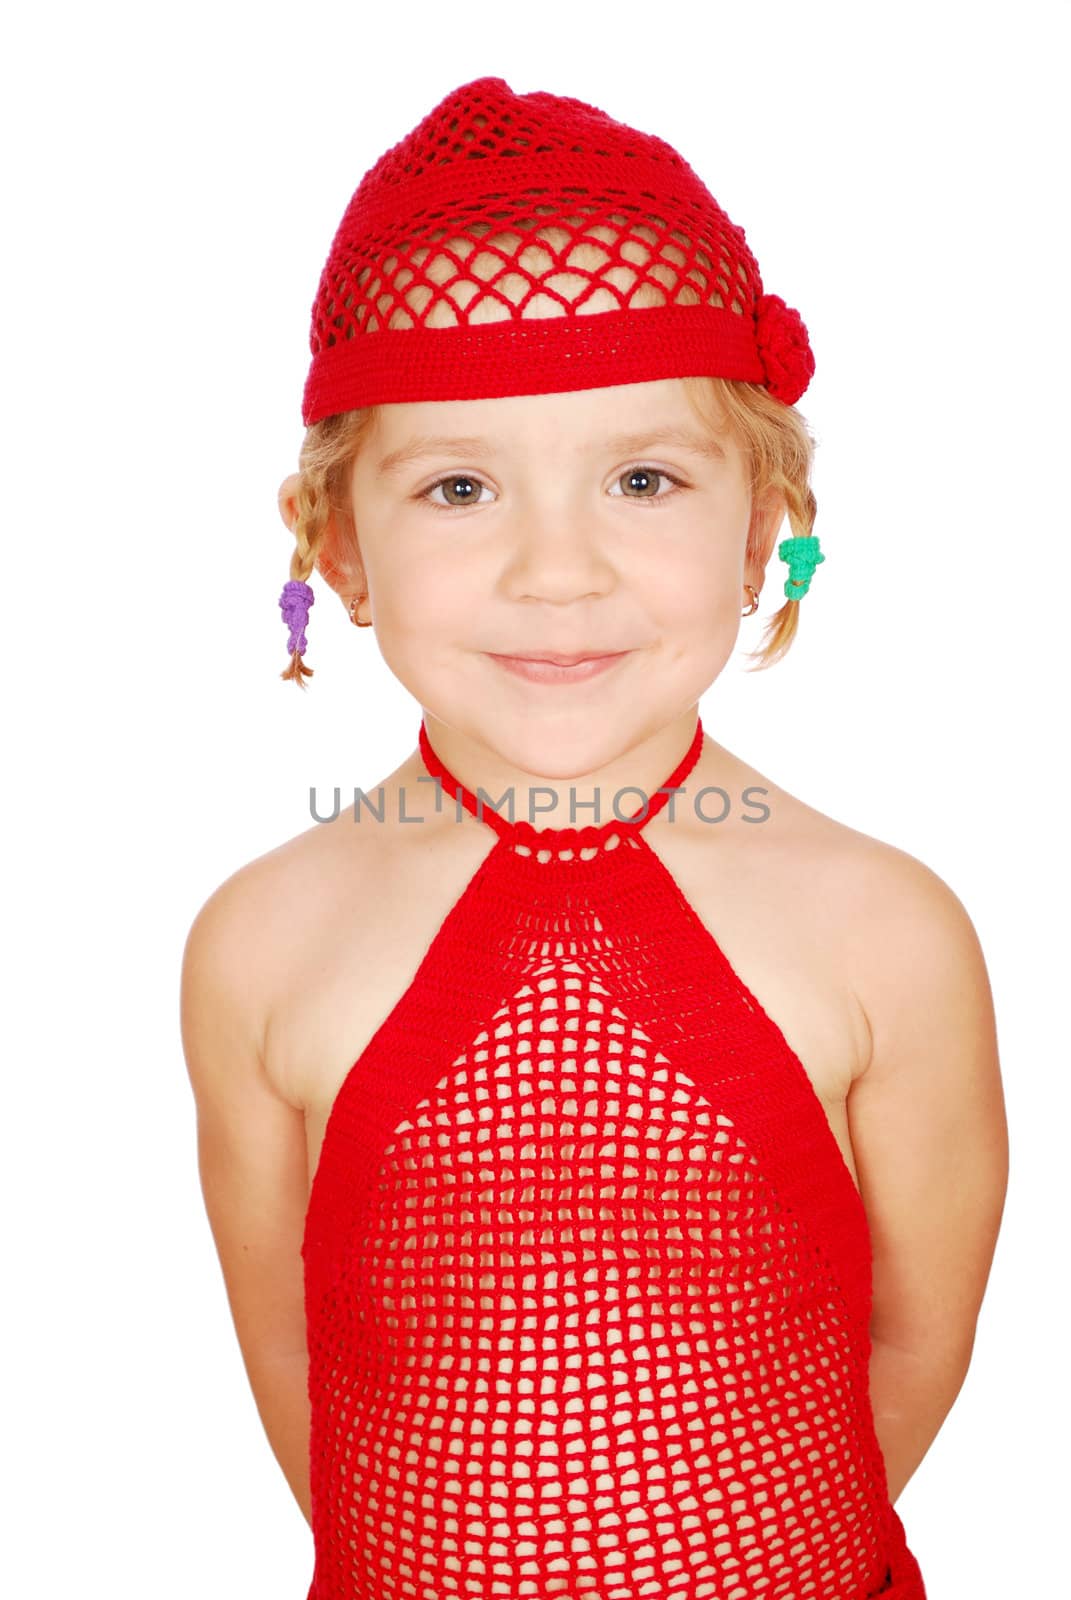 Beauty little girl in red knitted hat and dress